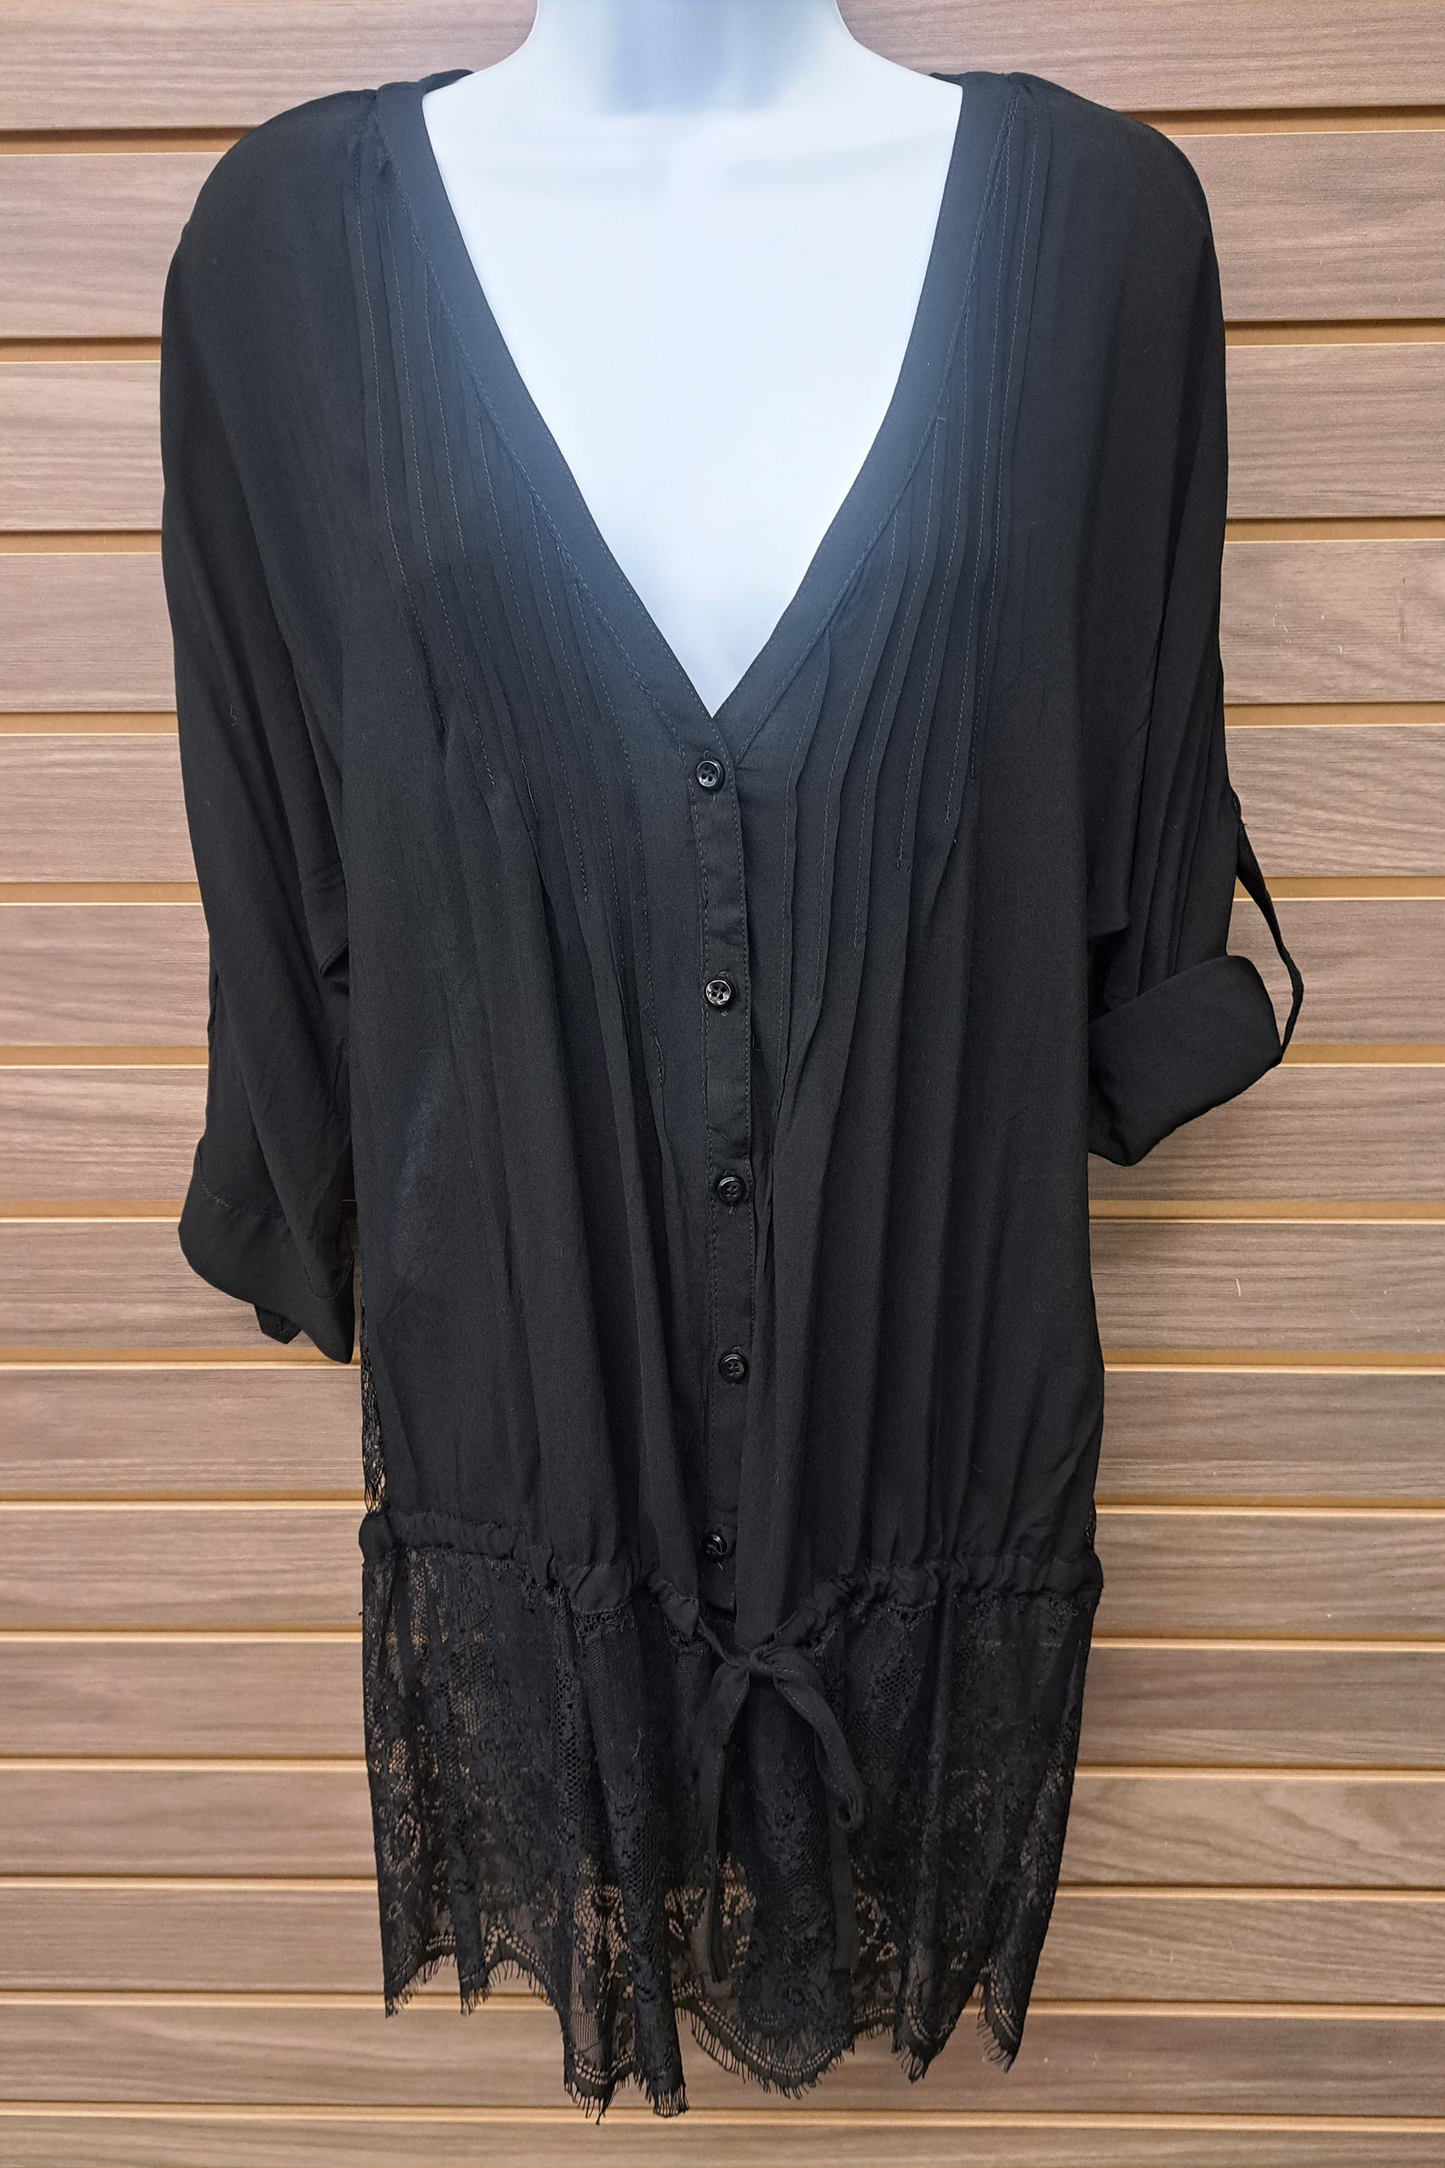 Button down blouse/cover up black